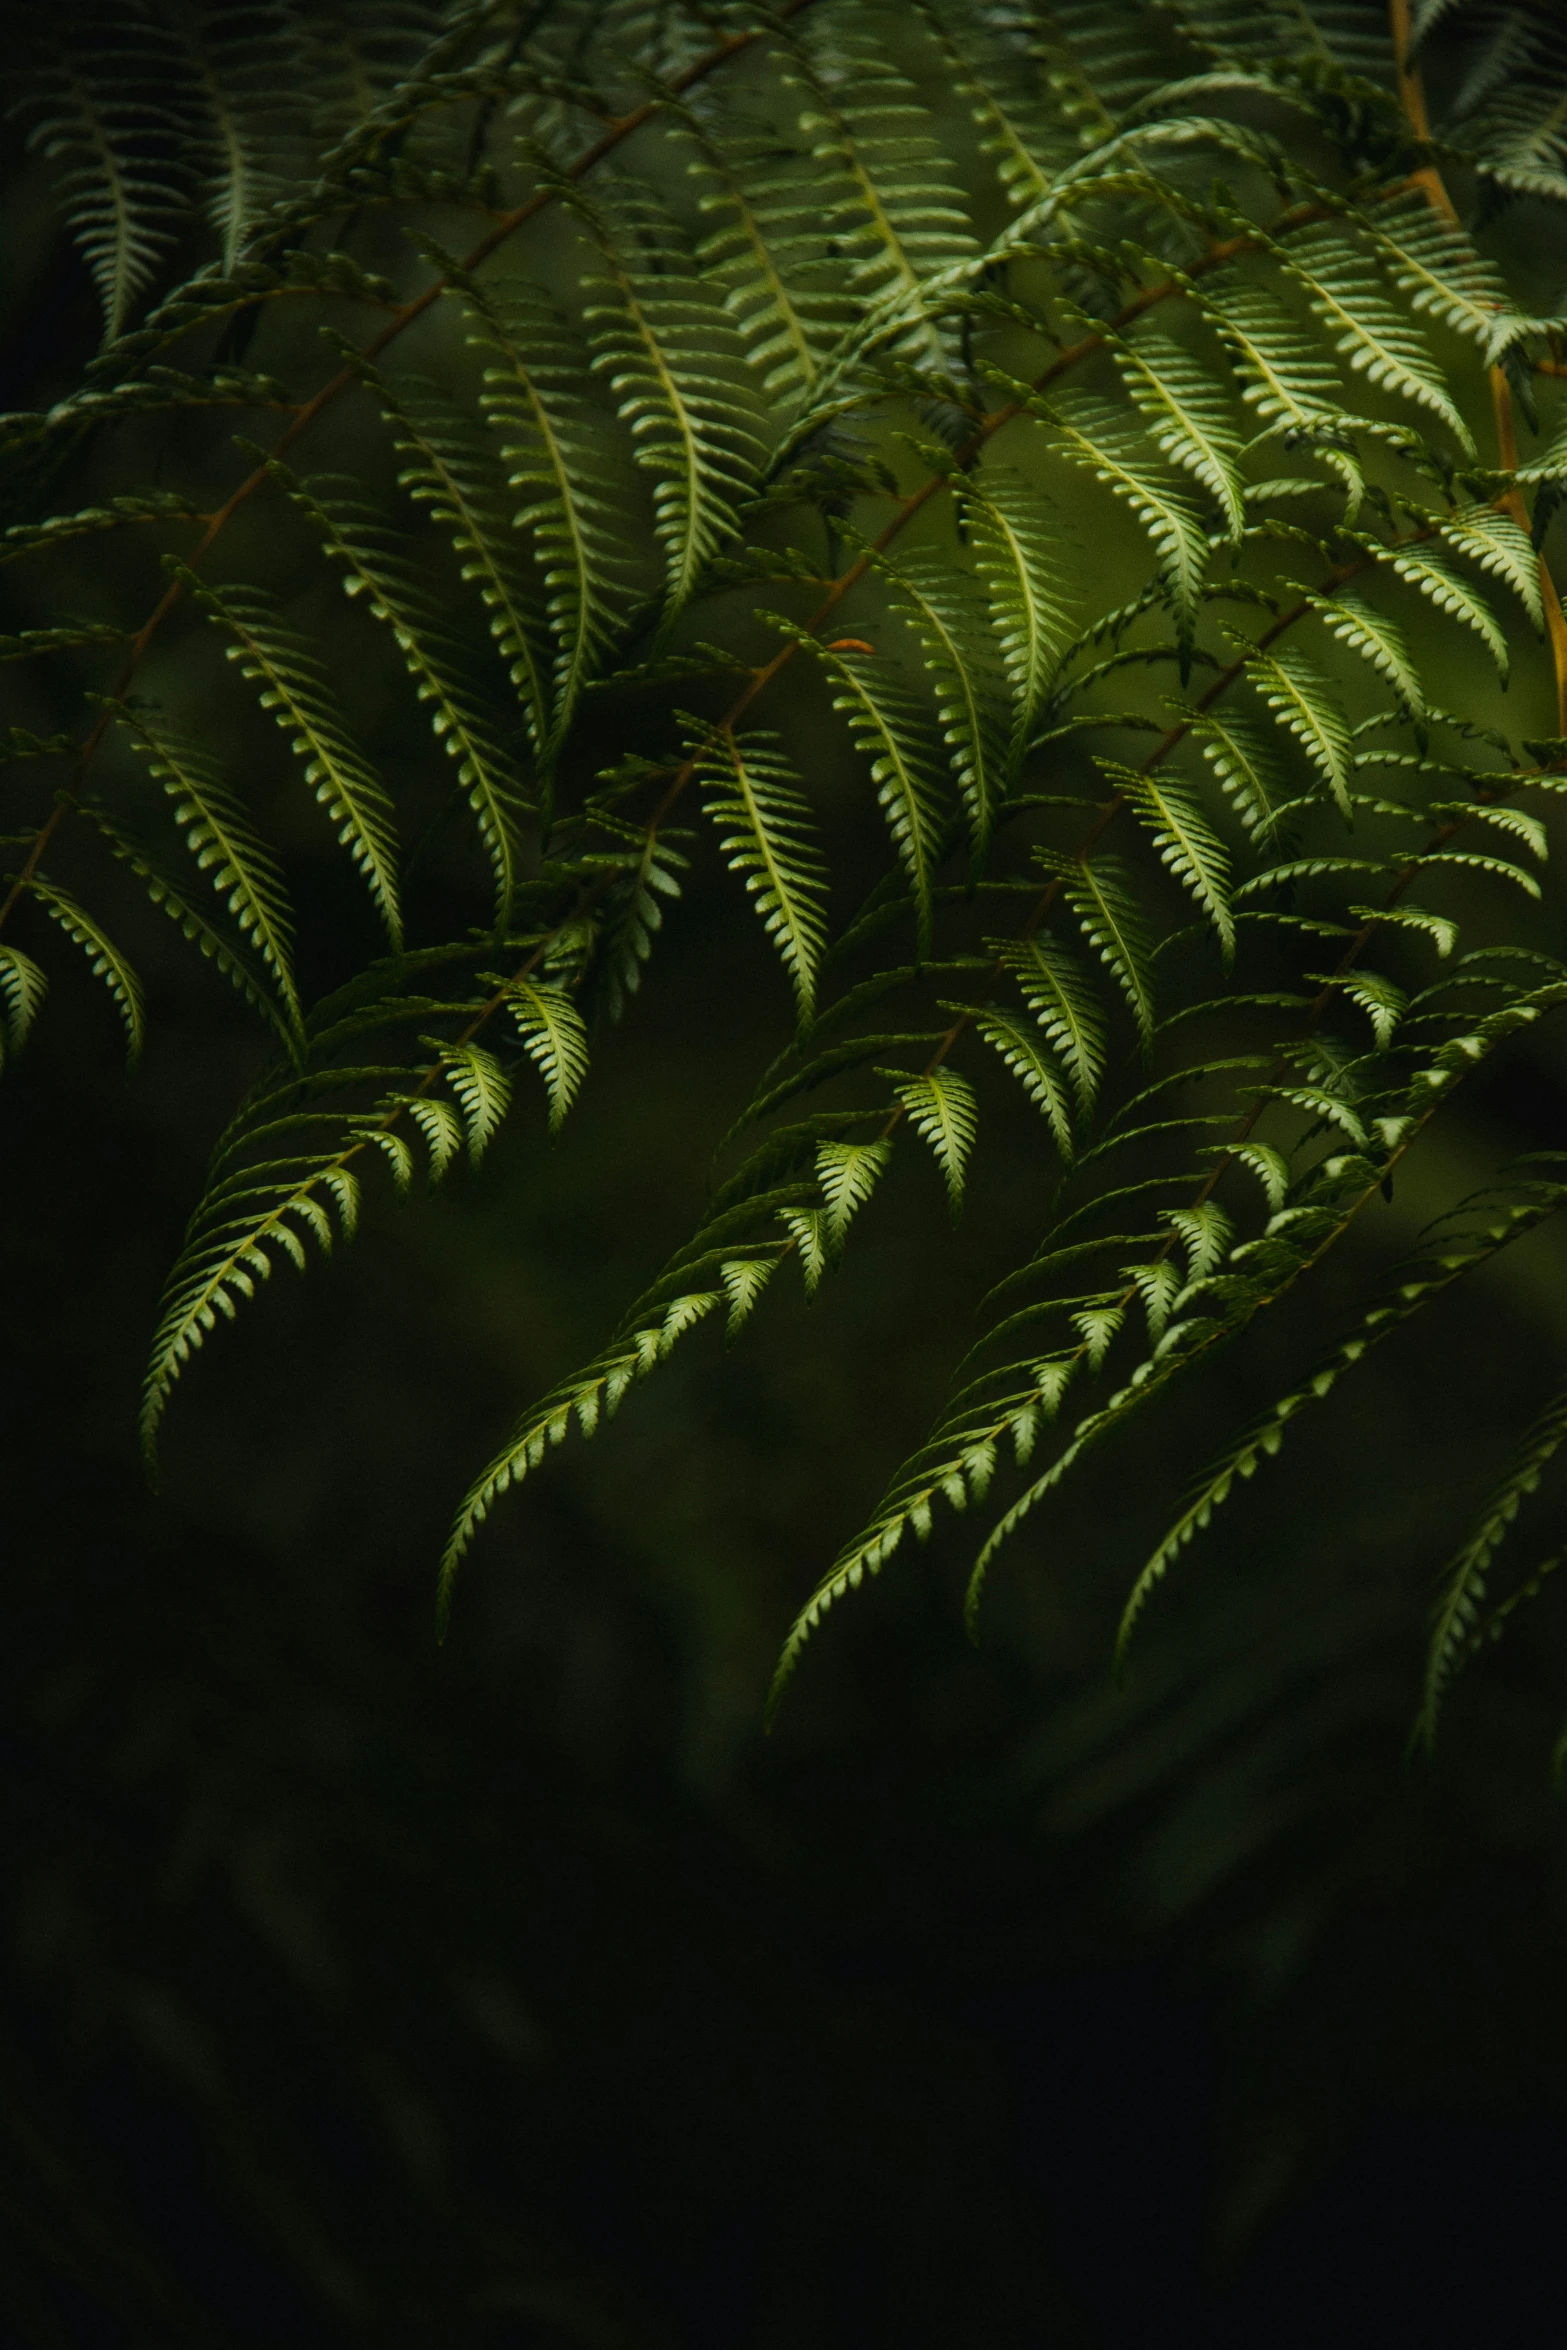 the large green fern is growing in a forest